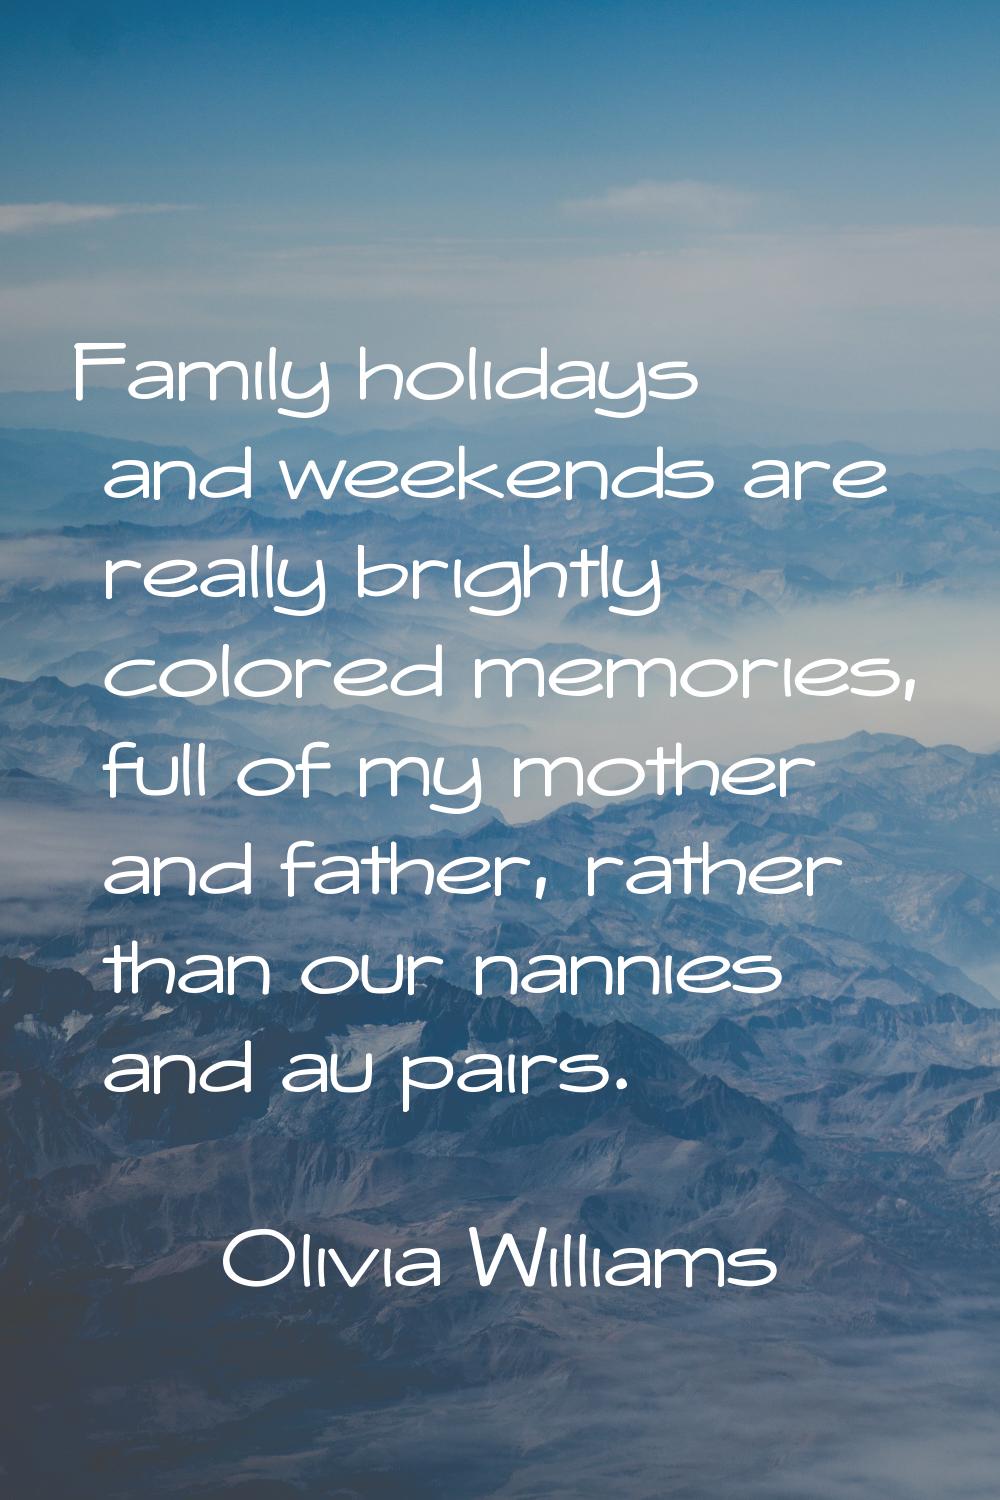 Family holidays and weekends are really brightly colored memories, full of my mother and father, ra